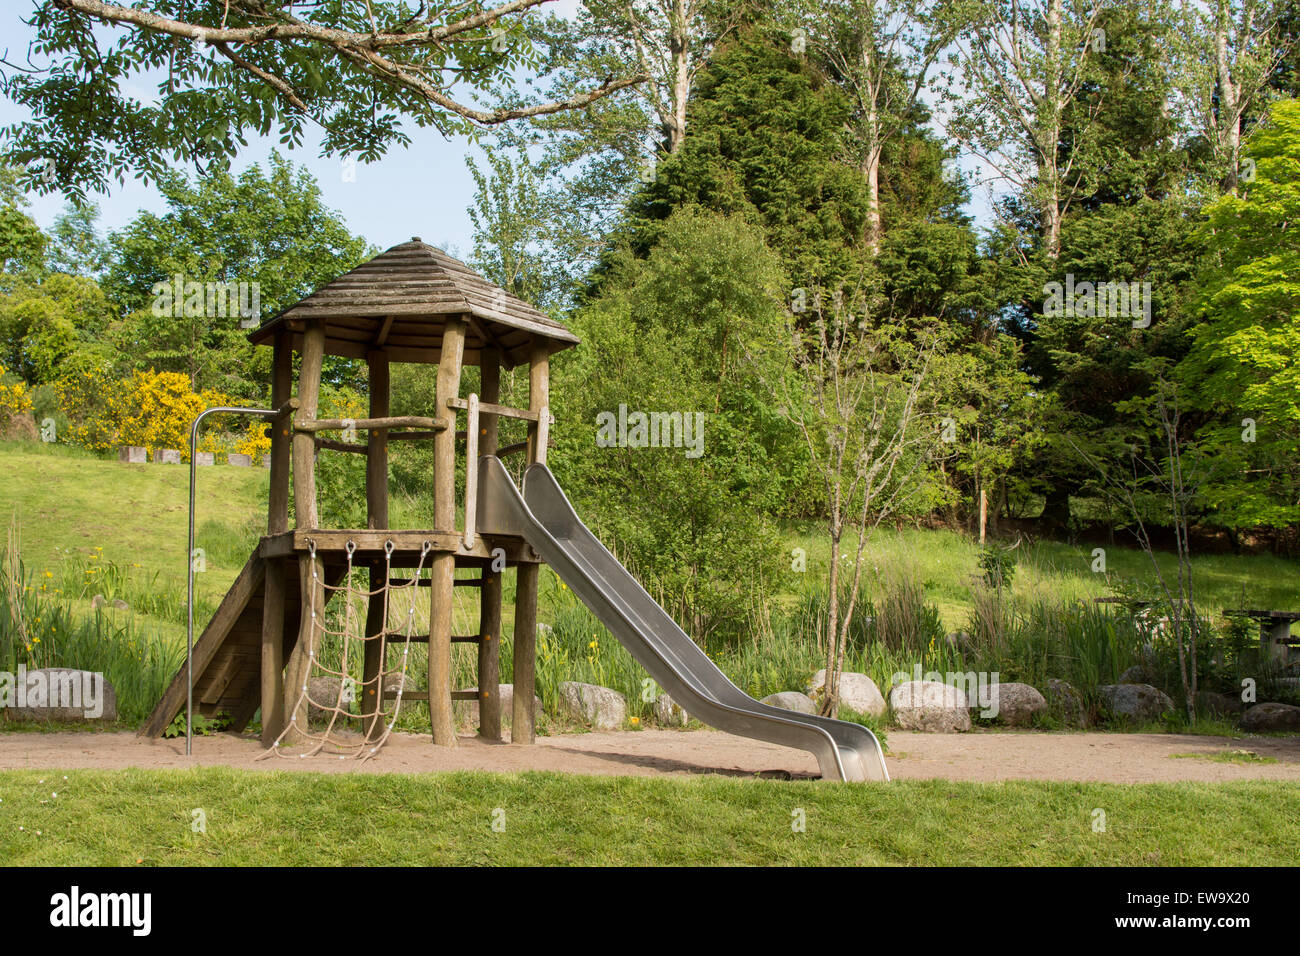 children's empty play area in natural surroundings - Balmaha, Loch Lomond and Trossachs National Park Visitor Centre, Scotland, Stock Photo